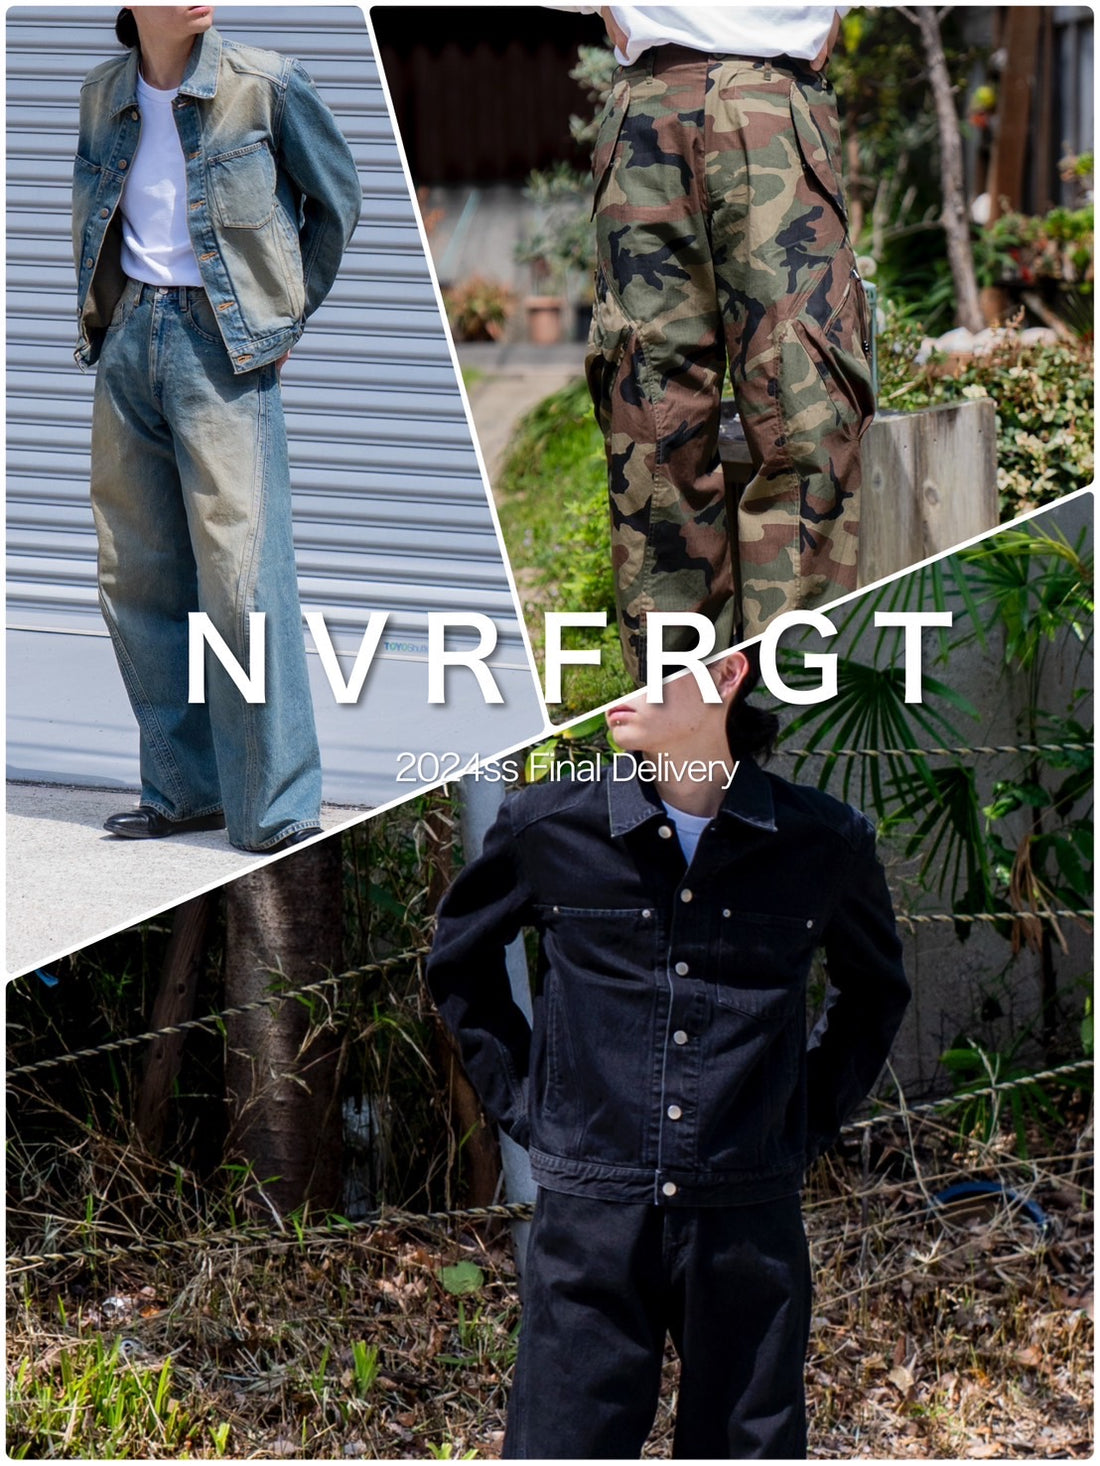 NVRFRGT 2nd delivery